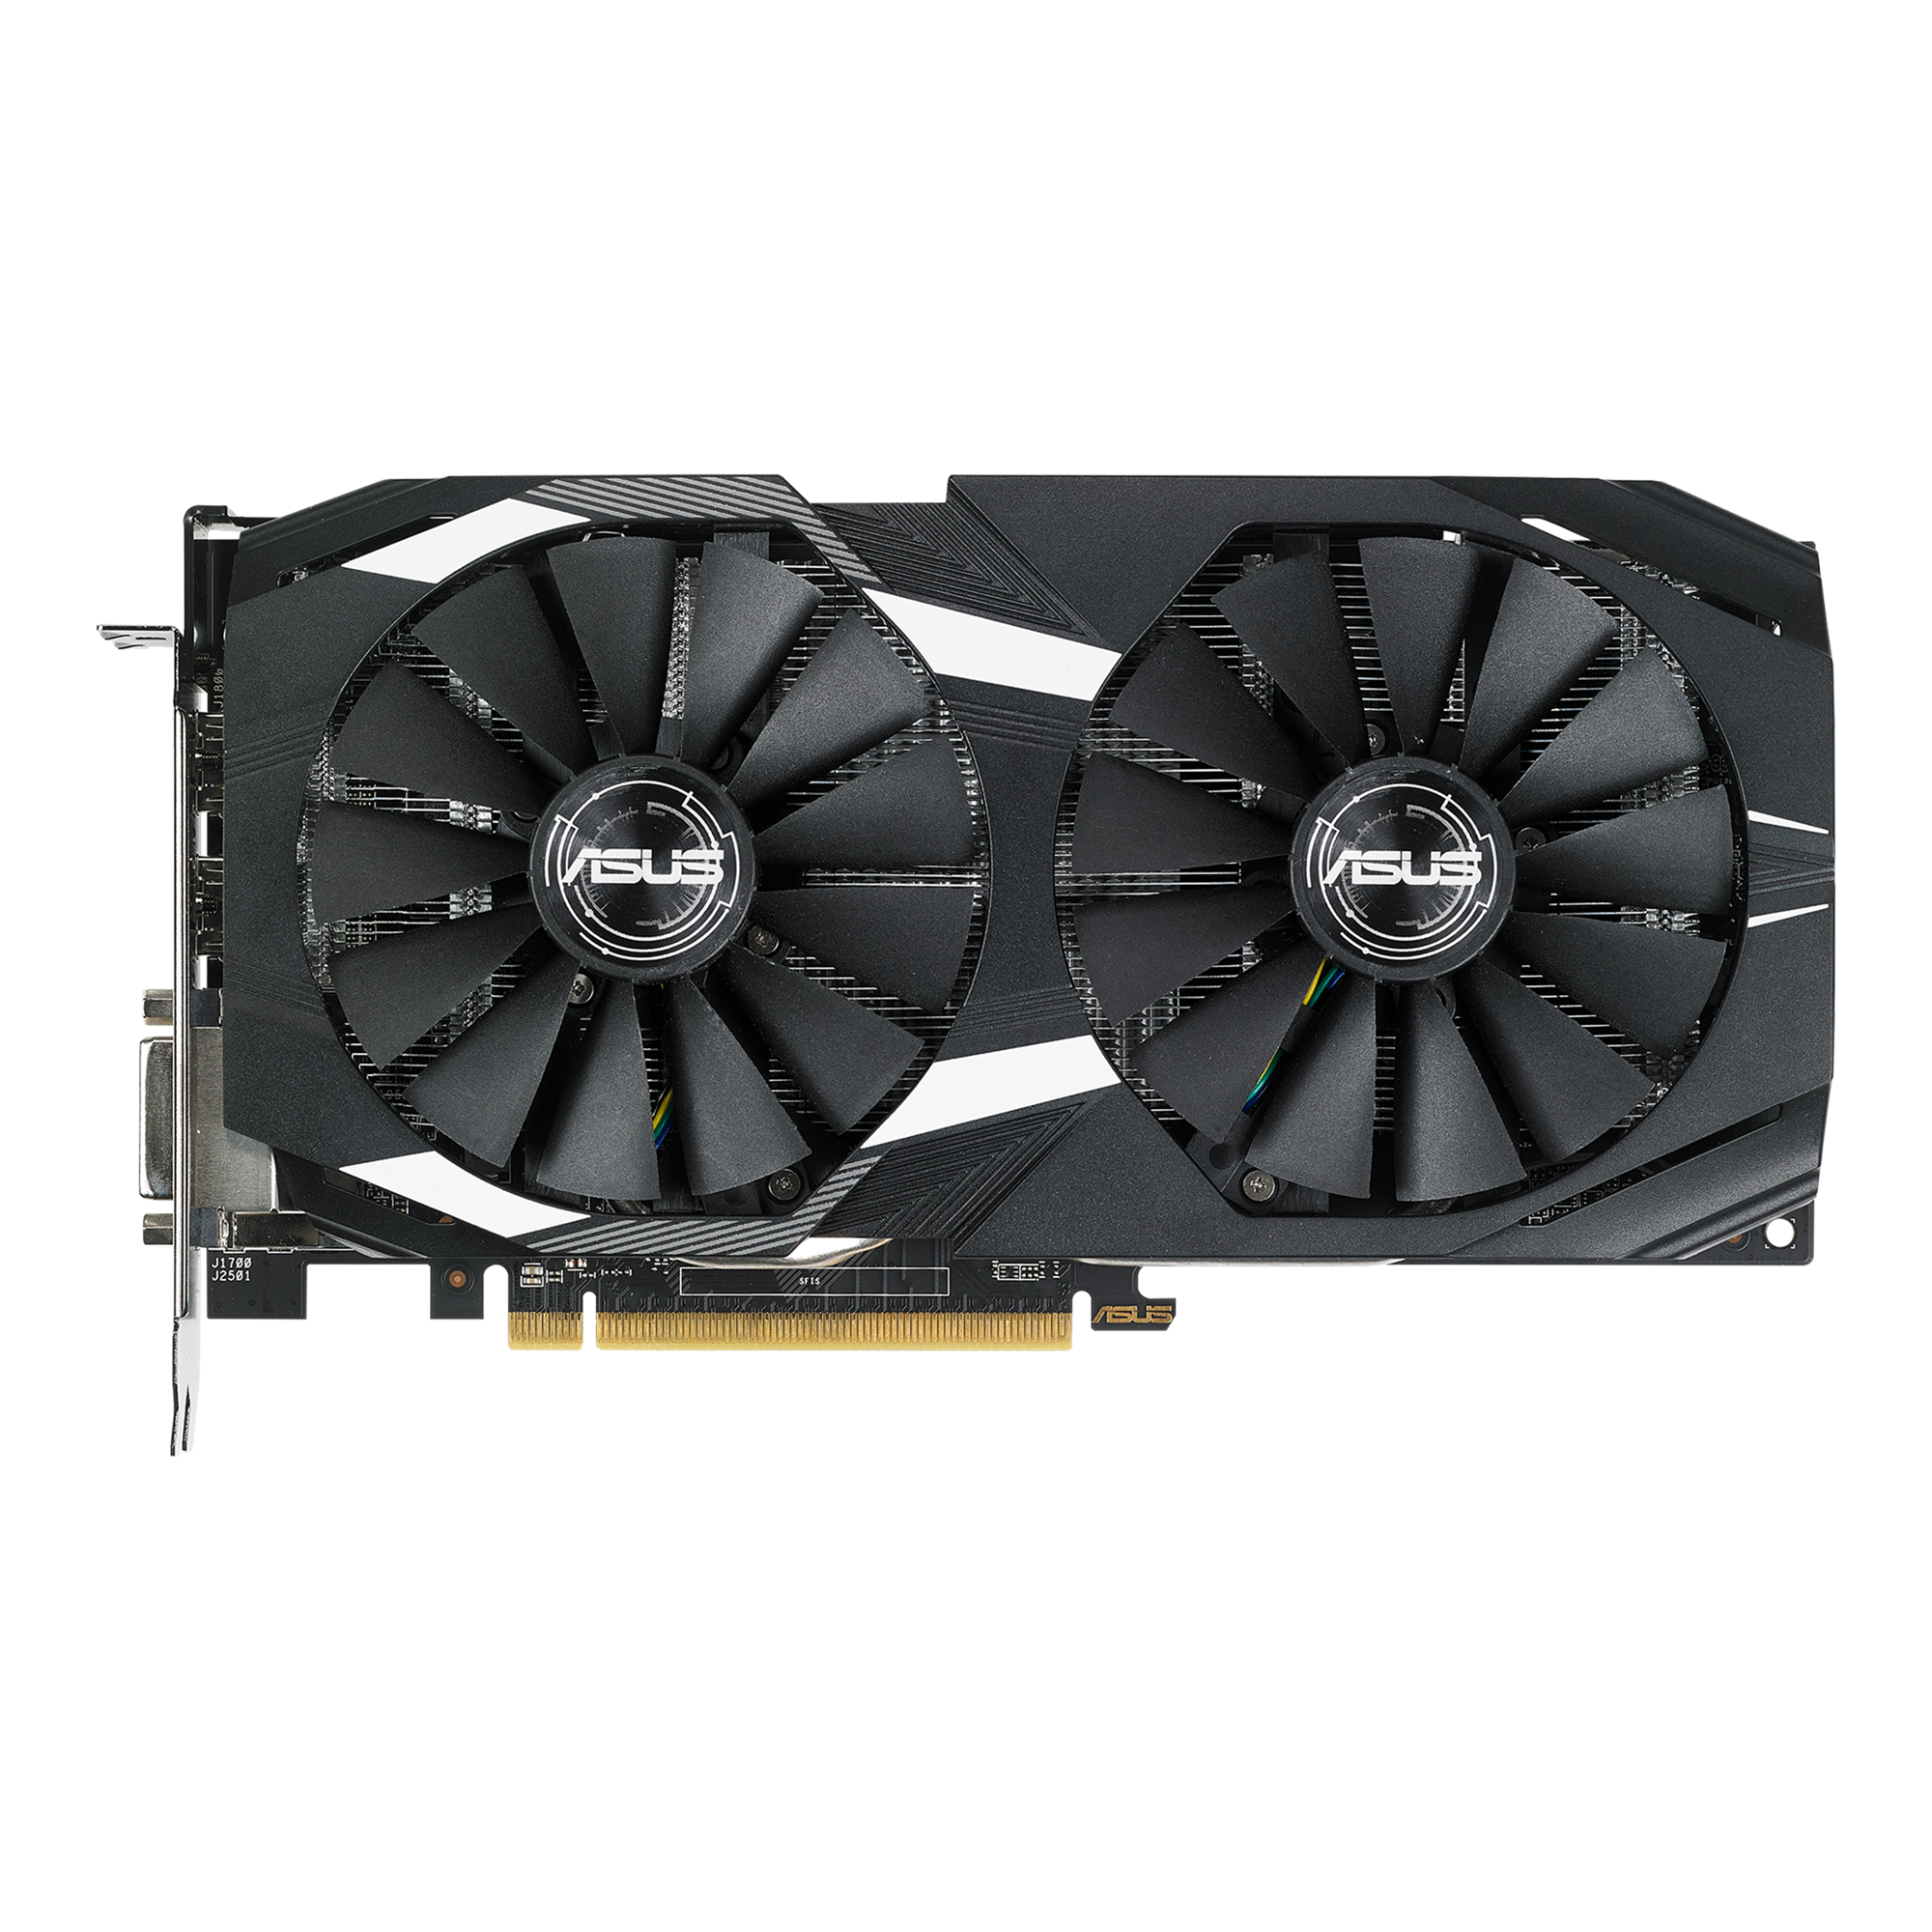 DUAL-RX580-O8G｜Graphics Cards｜ASUS Switzerland